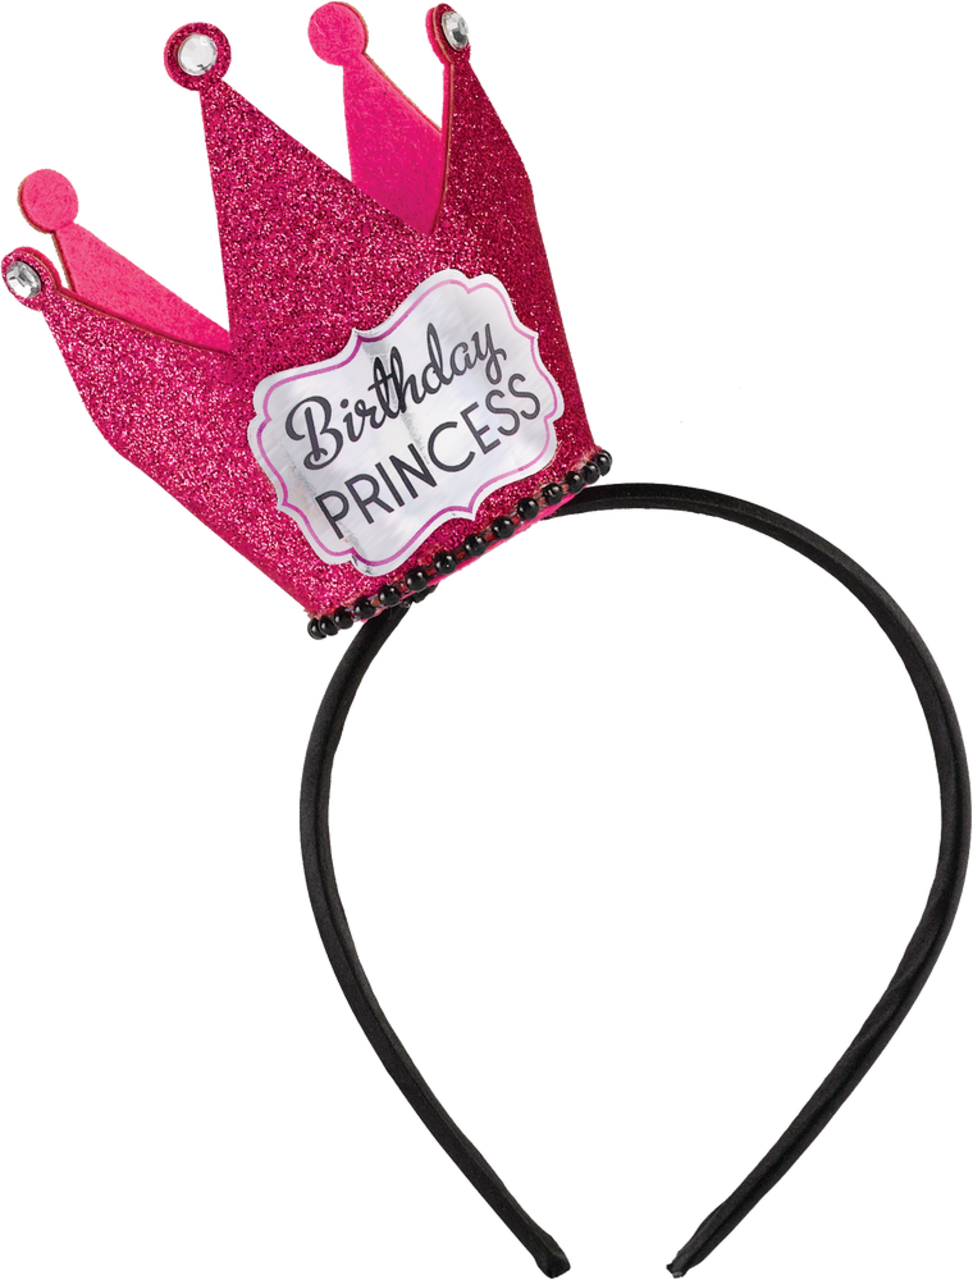 https://media-www.canadiantire.ca/product/seasonal-gardening/party-city-everyday/party-city-party-supplies-decor/8434257/glitter-pink-birthday-princess-crown-headband-56808419-befd-4105-985b-554ad113bf98.png?imdensity=1&imwidth=640&impolicy=mZoom